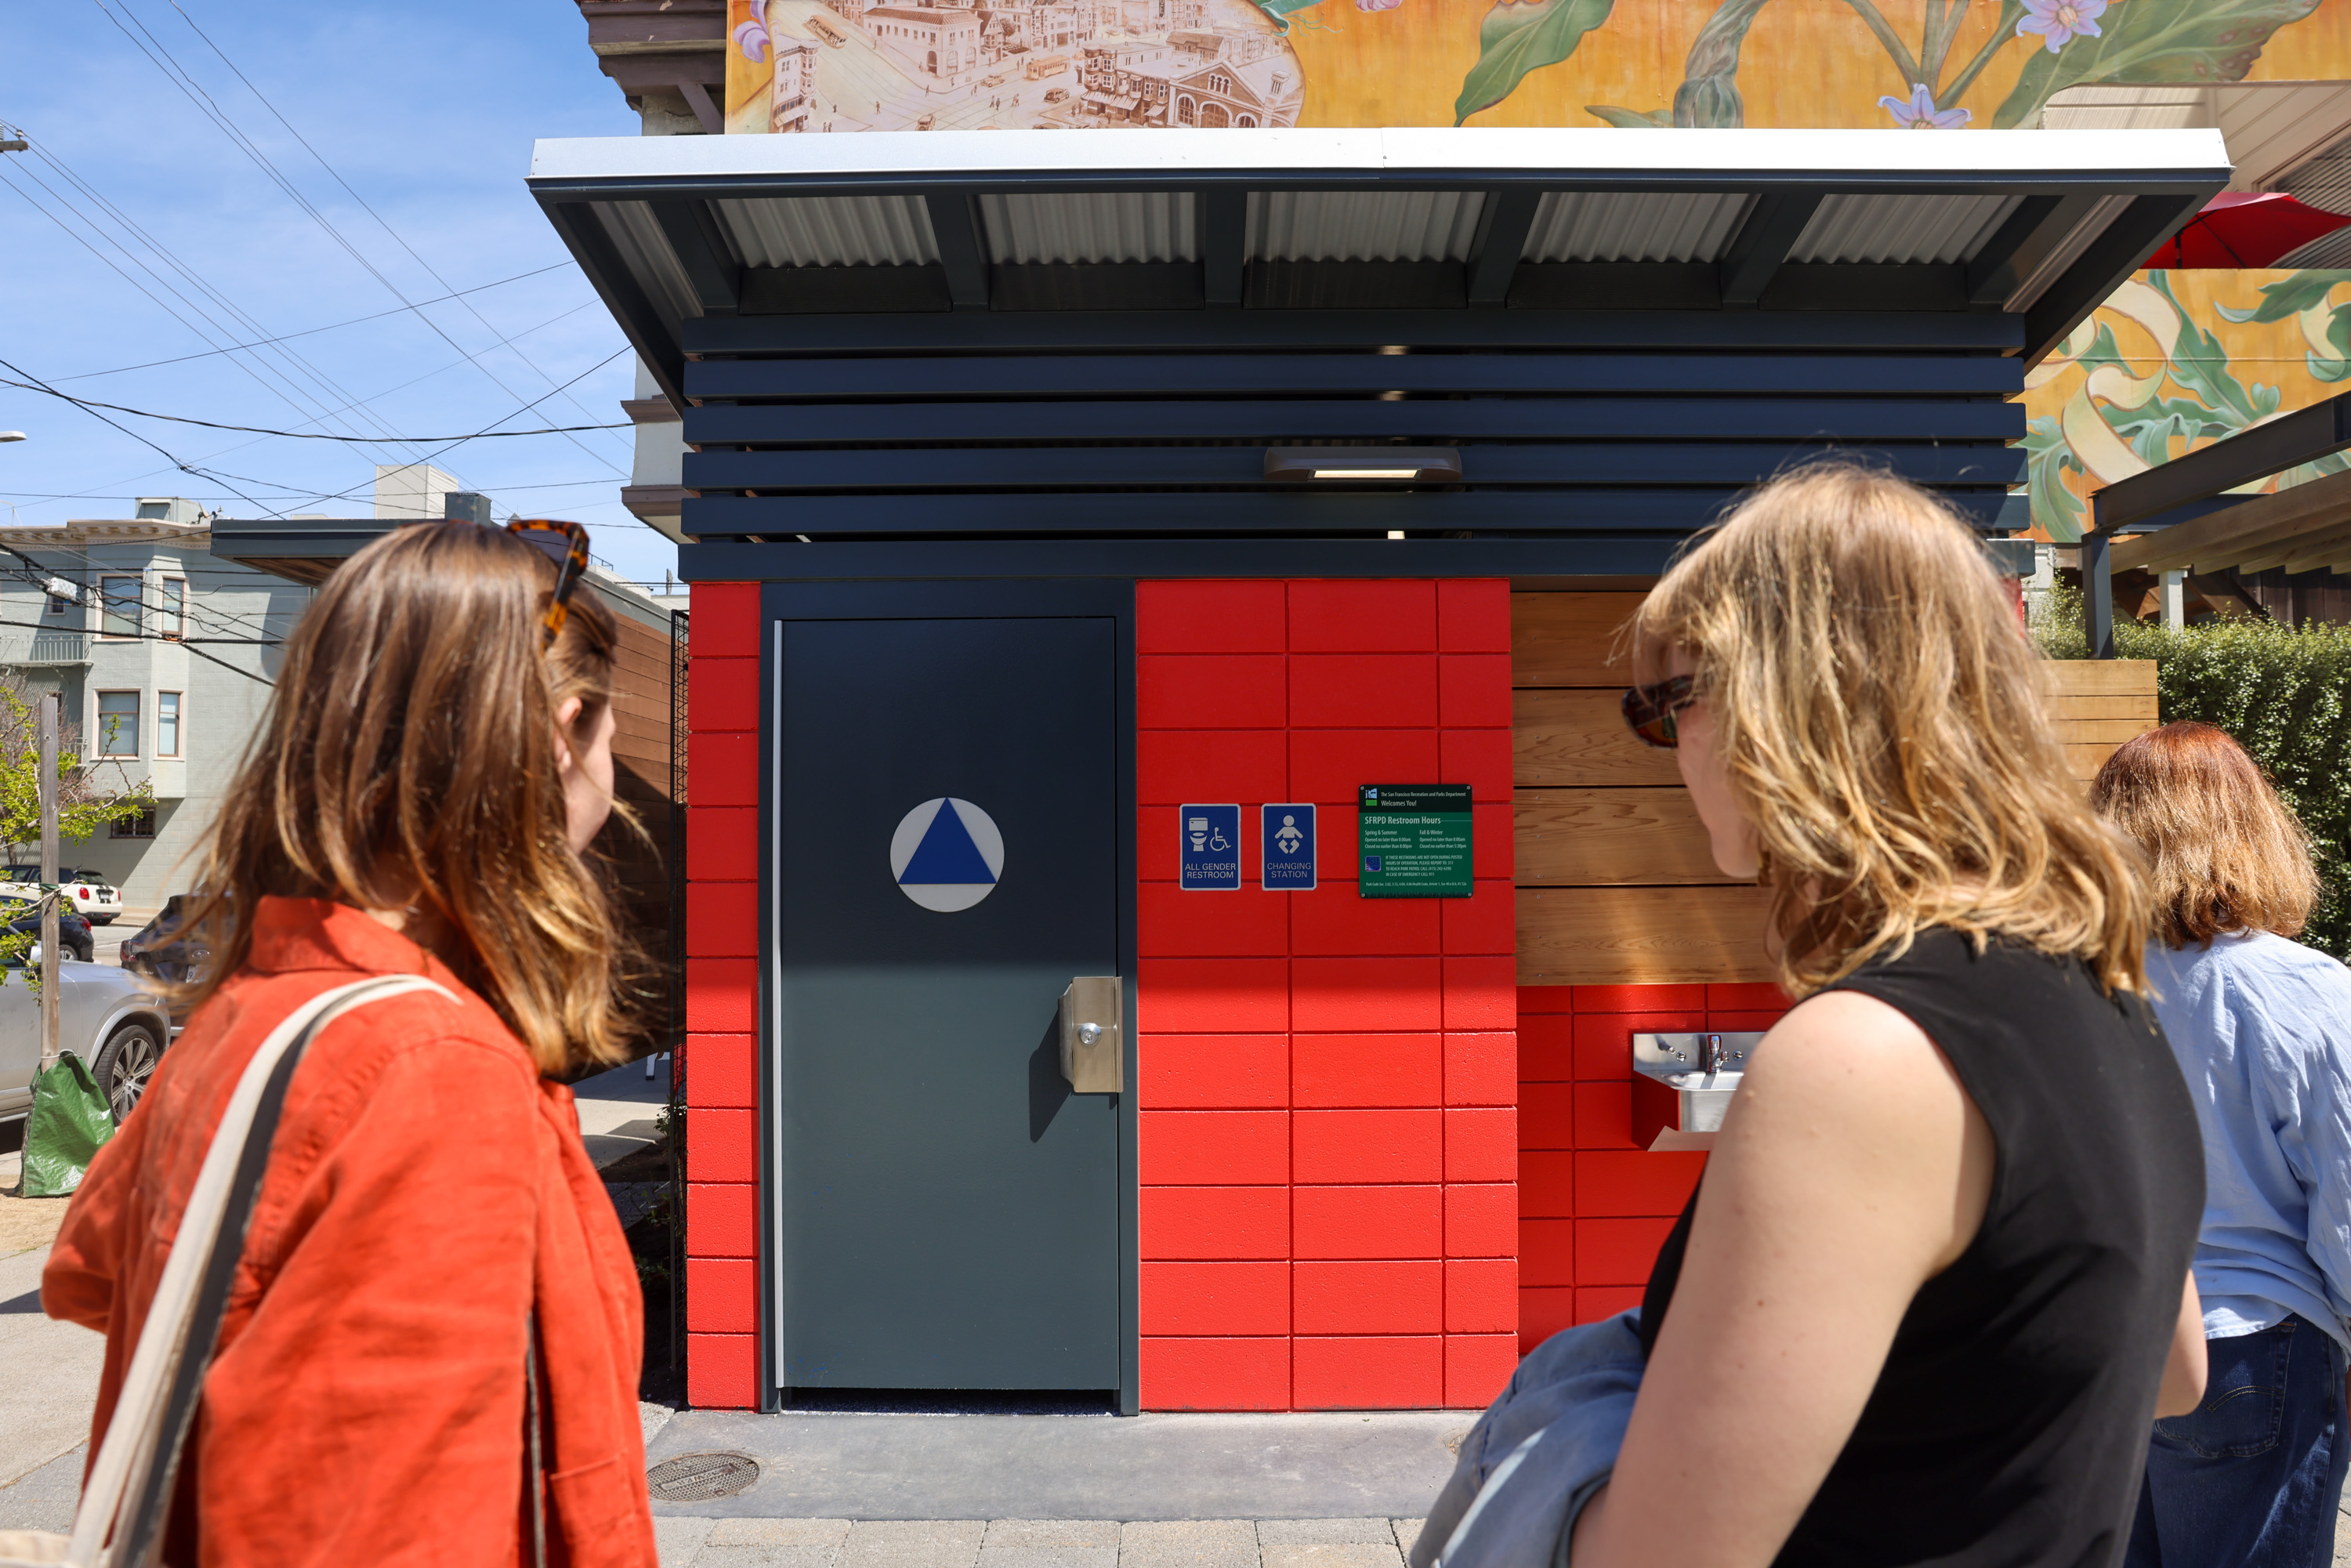 Adrienne Meyers, left, and Grace Shaver check out the new public restroom in the Noe Valley Town Square in San Francisco on Tuesday.